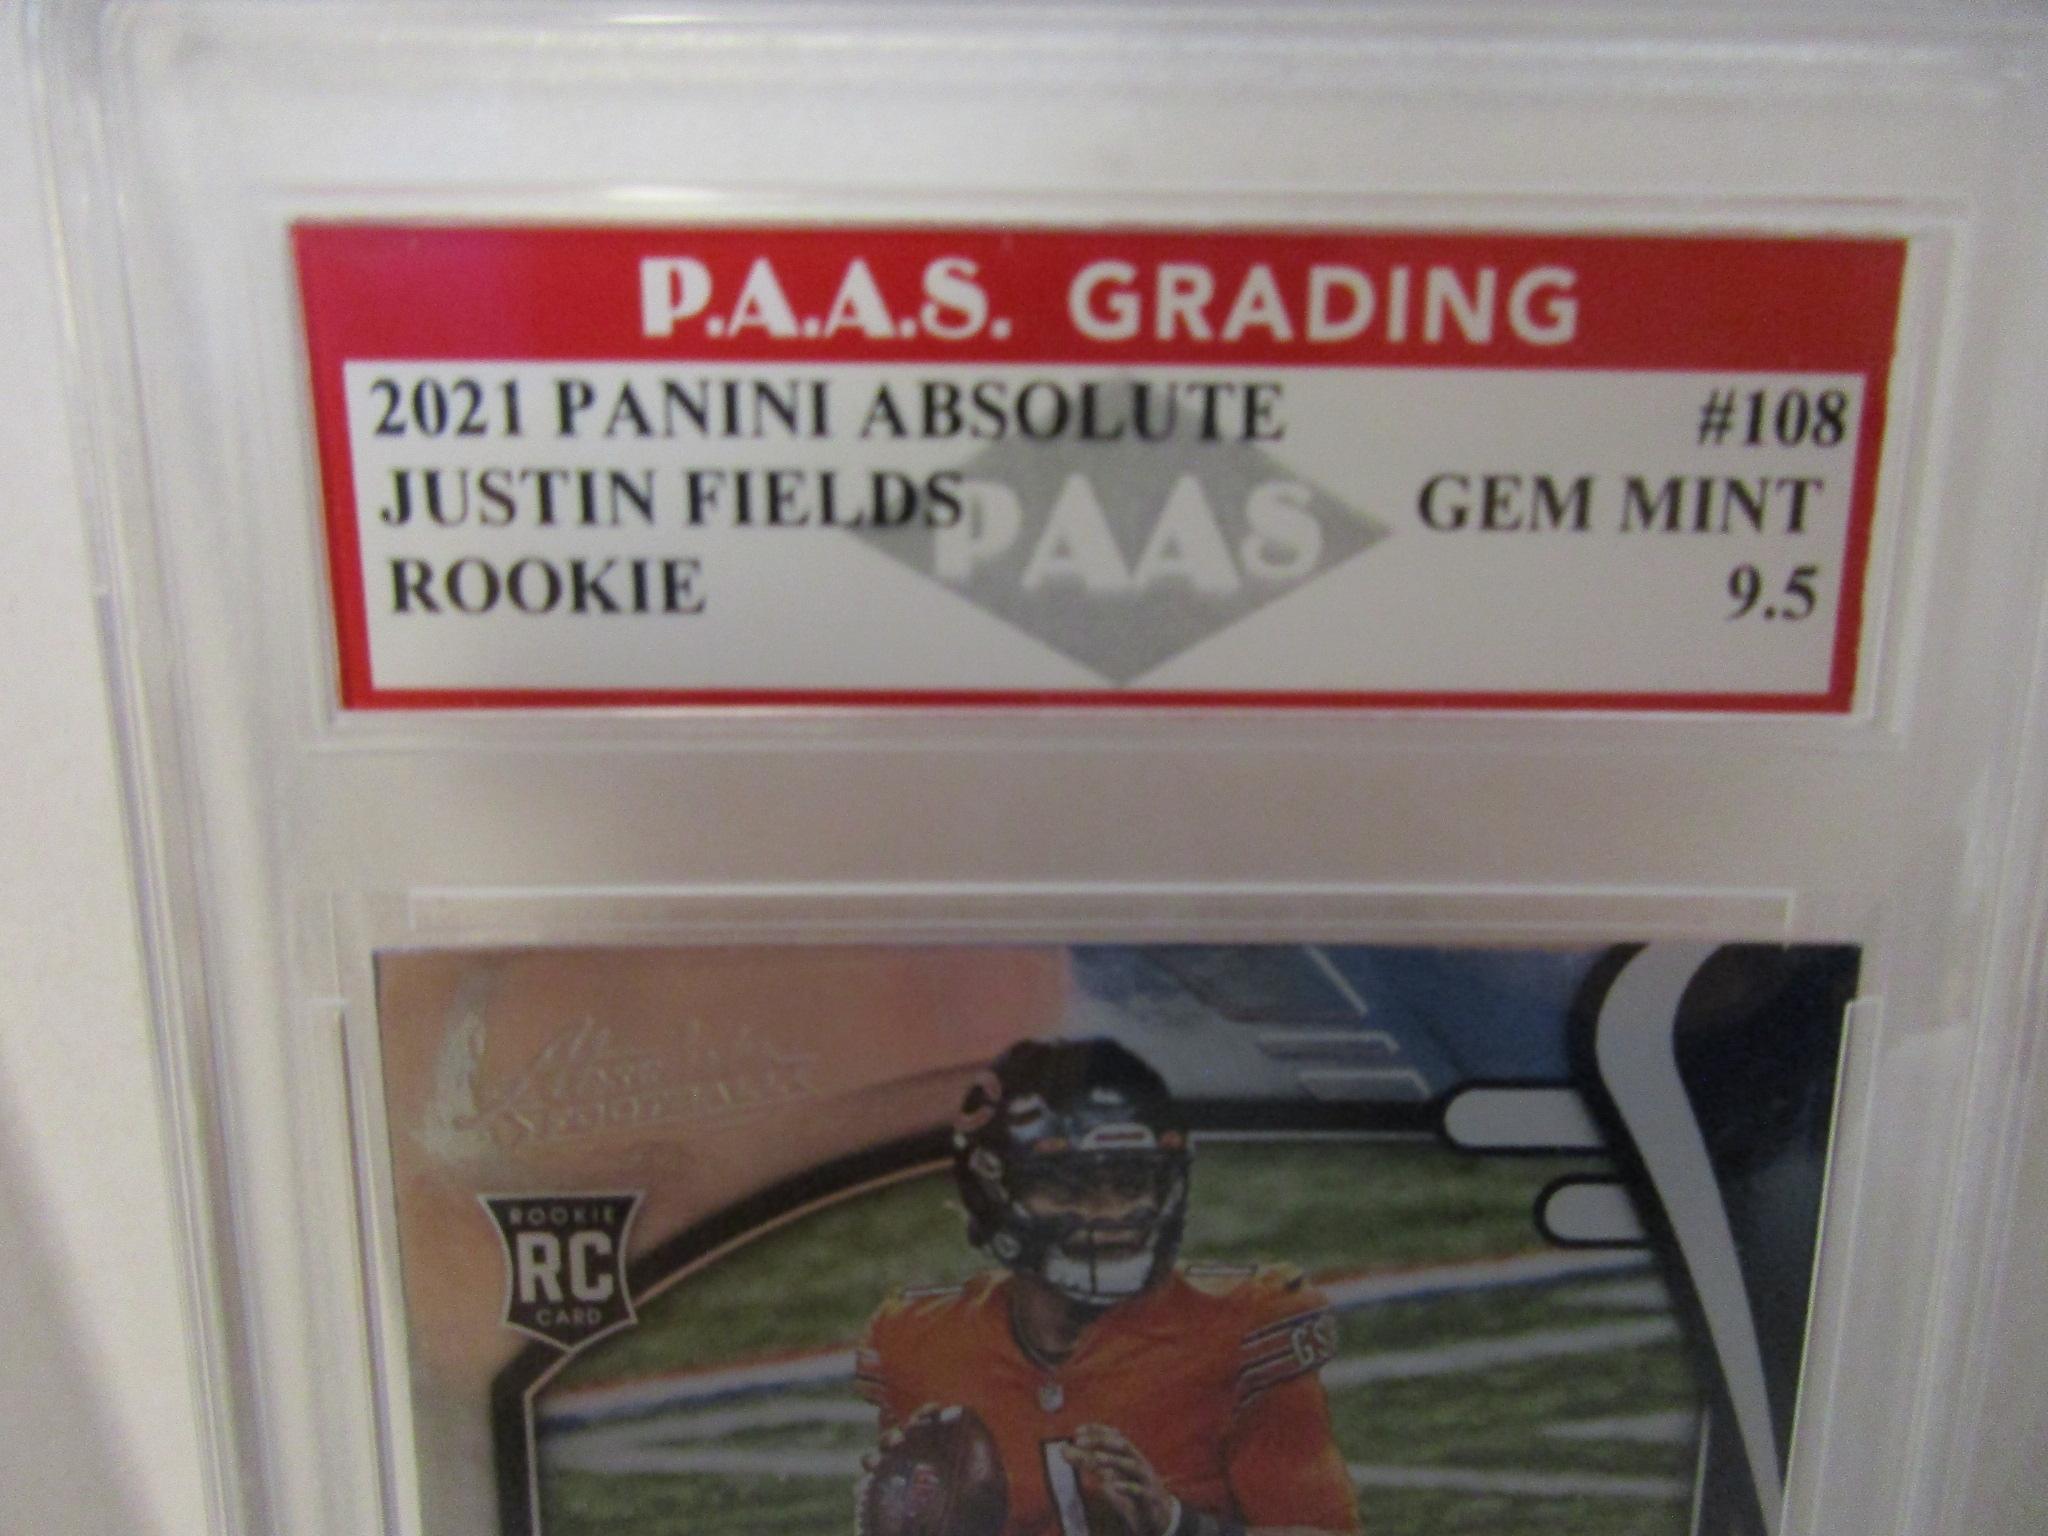 Justin Fields Chicago Bears 2021 Panini Absolute ROOKIE #108 graded PAAS Gem Mint 9.5